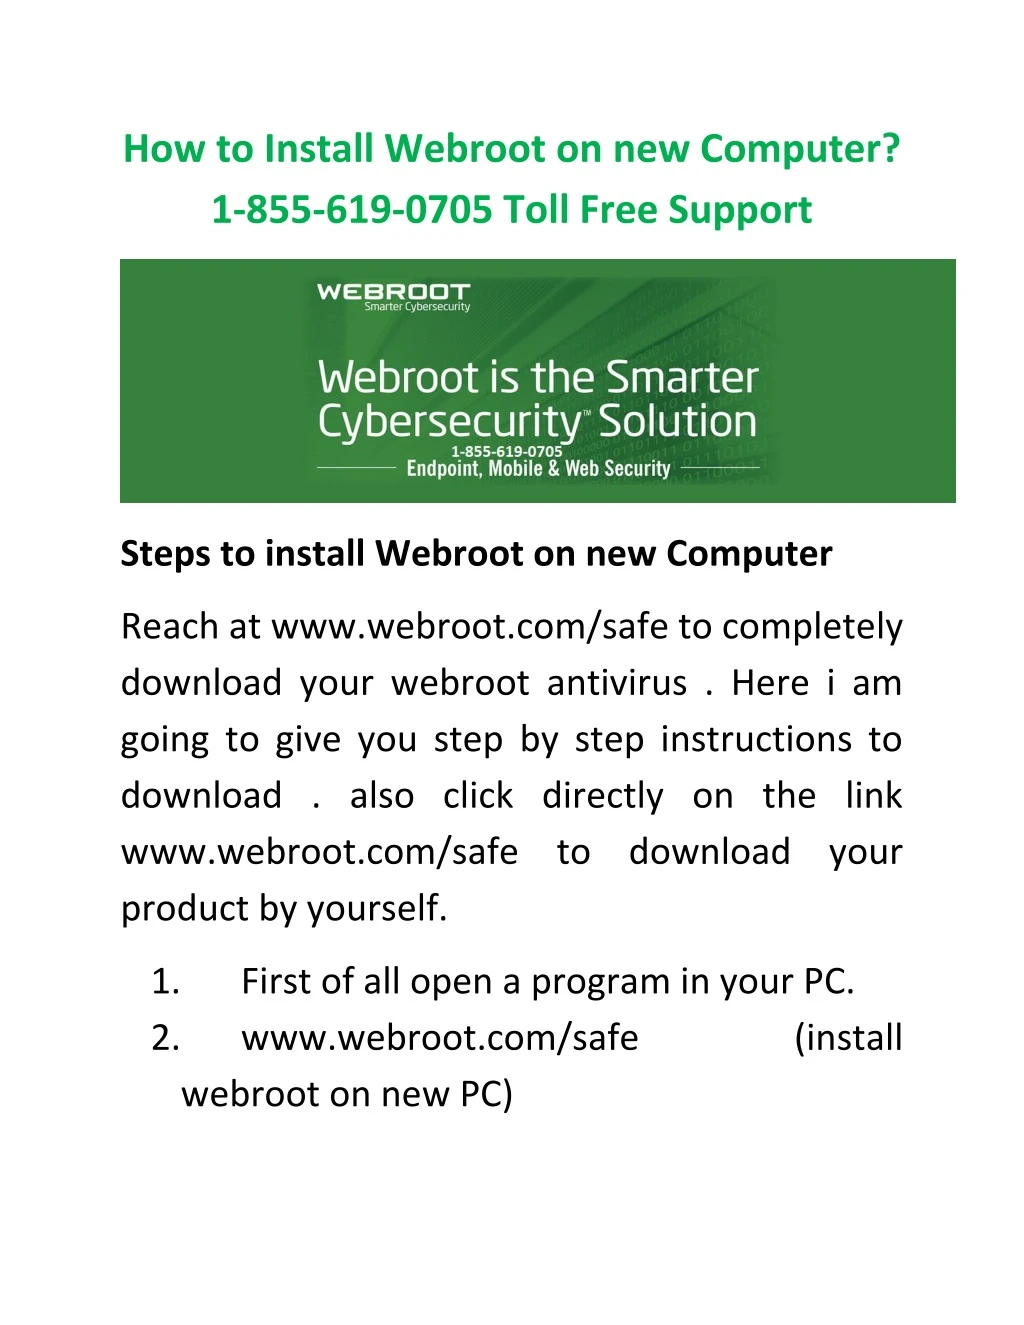 how to install webroot on new computer